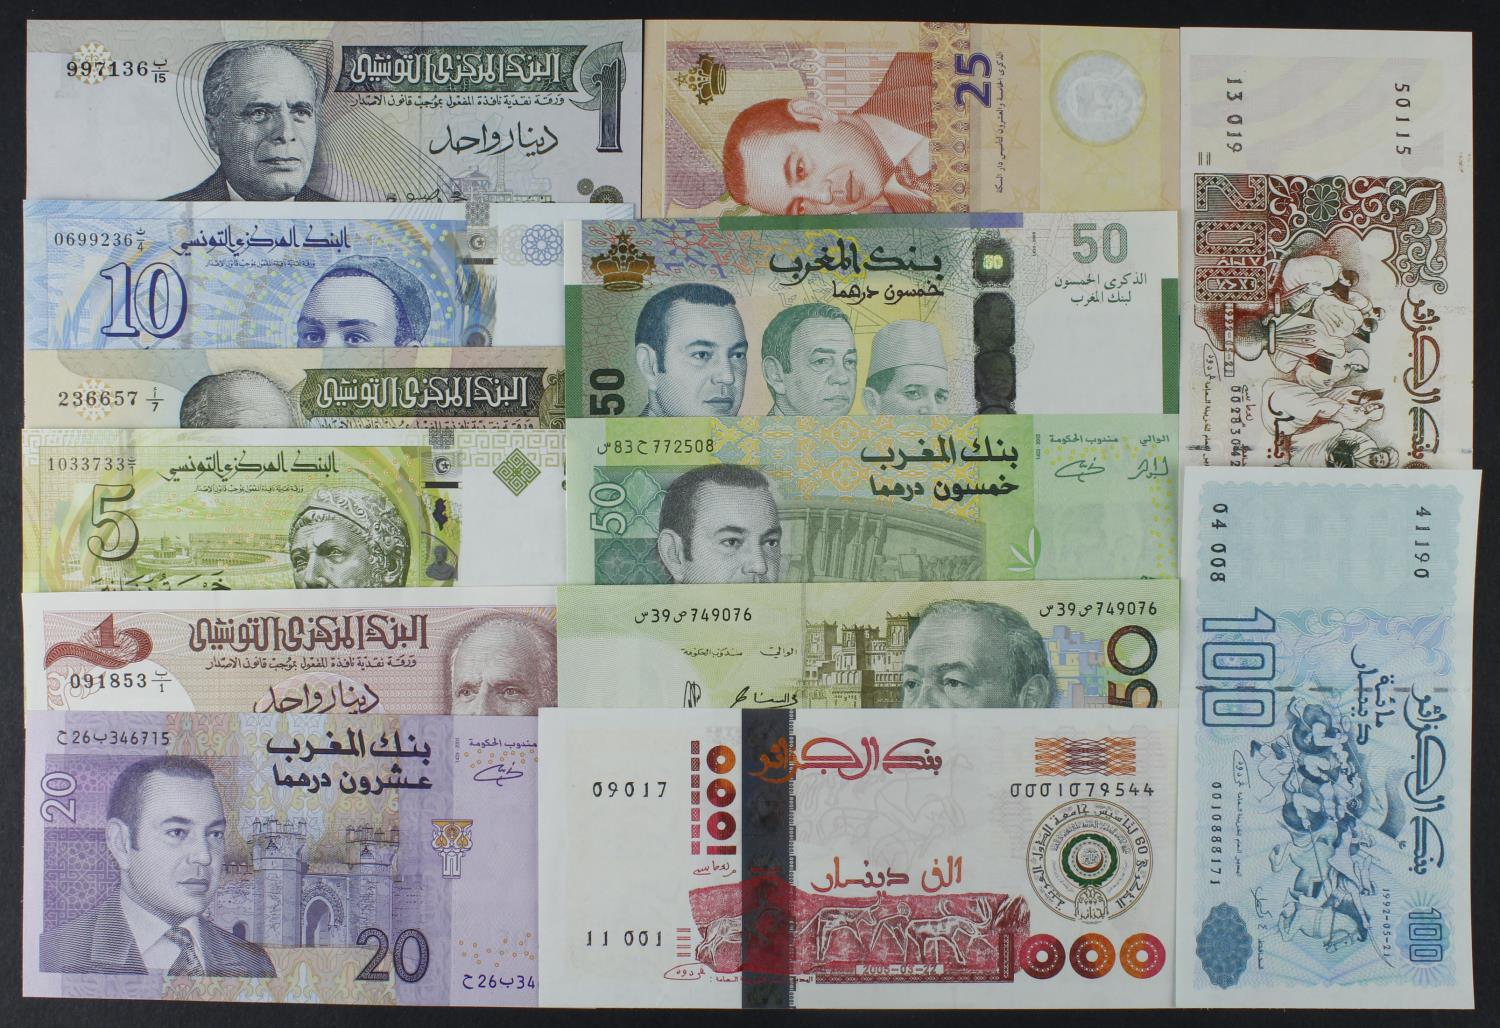 Africa, North Africa group (13), Algeria 1000 Dinars commemorative issue dated 2005, 200 and 100